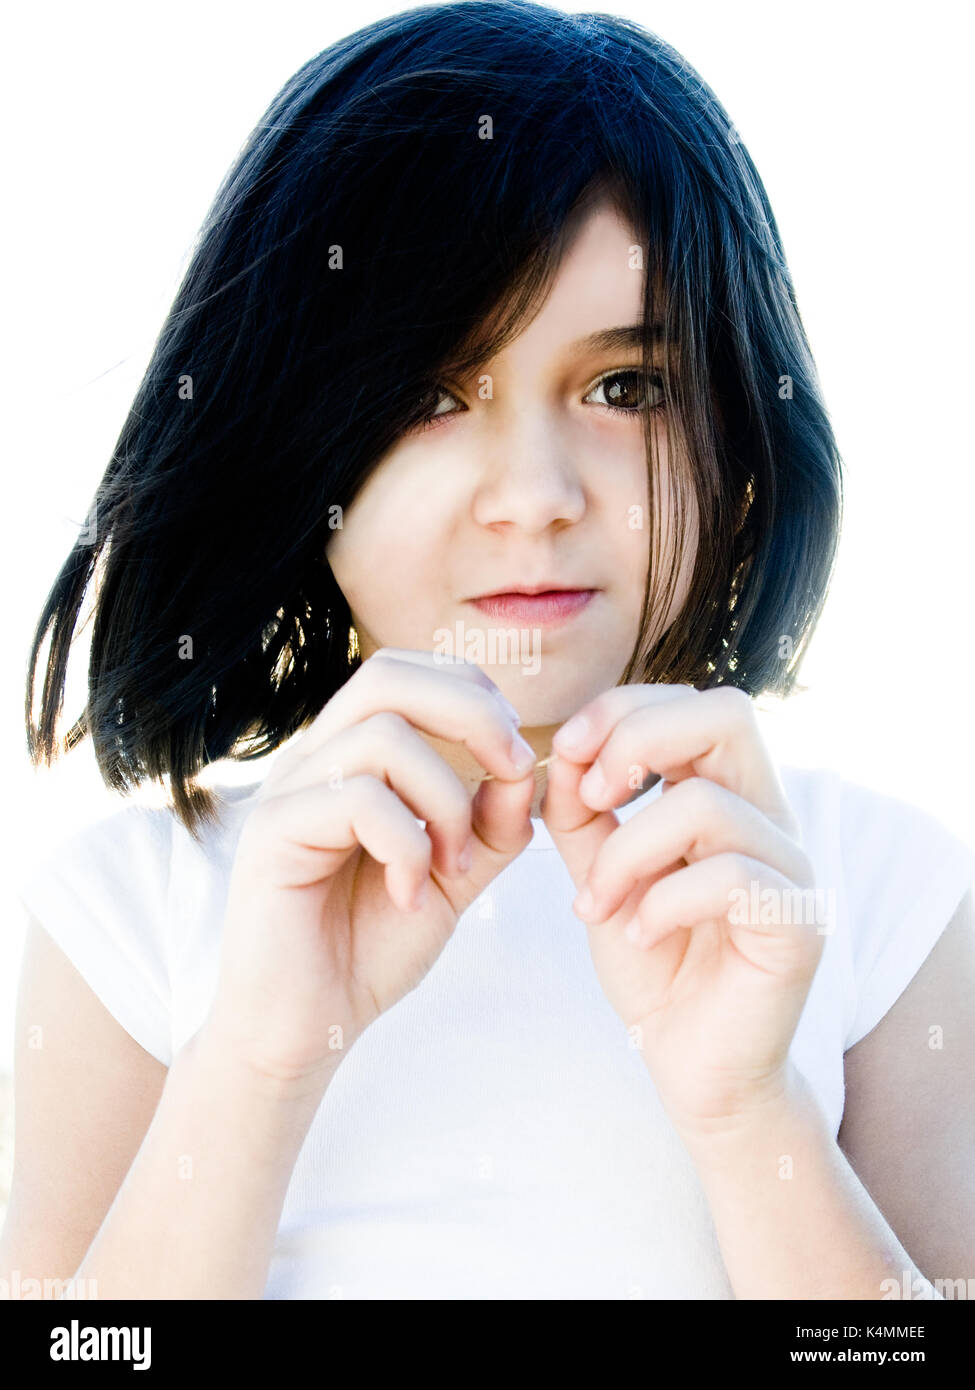 Portrait of a young girl, elementary school age, brightly lit outside for a high contrast effect. Looking at camera and being playful. Stock Photo